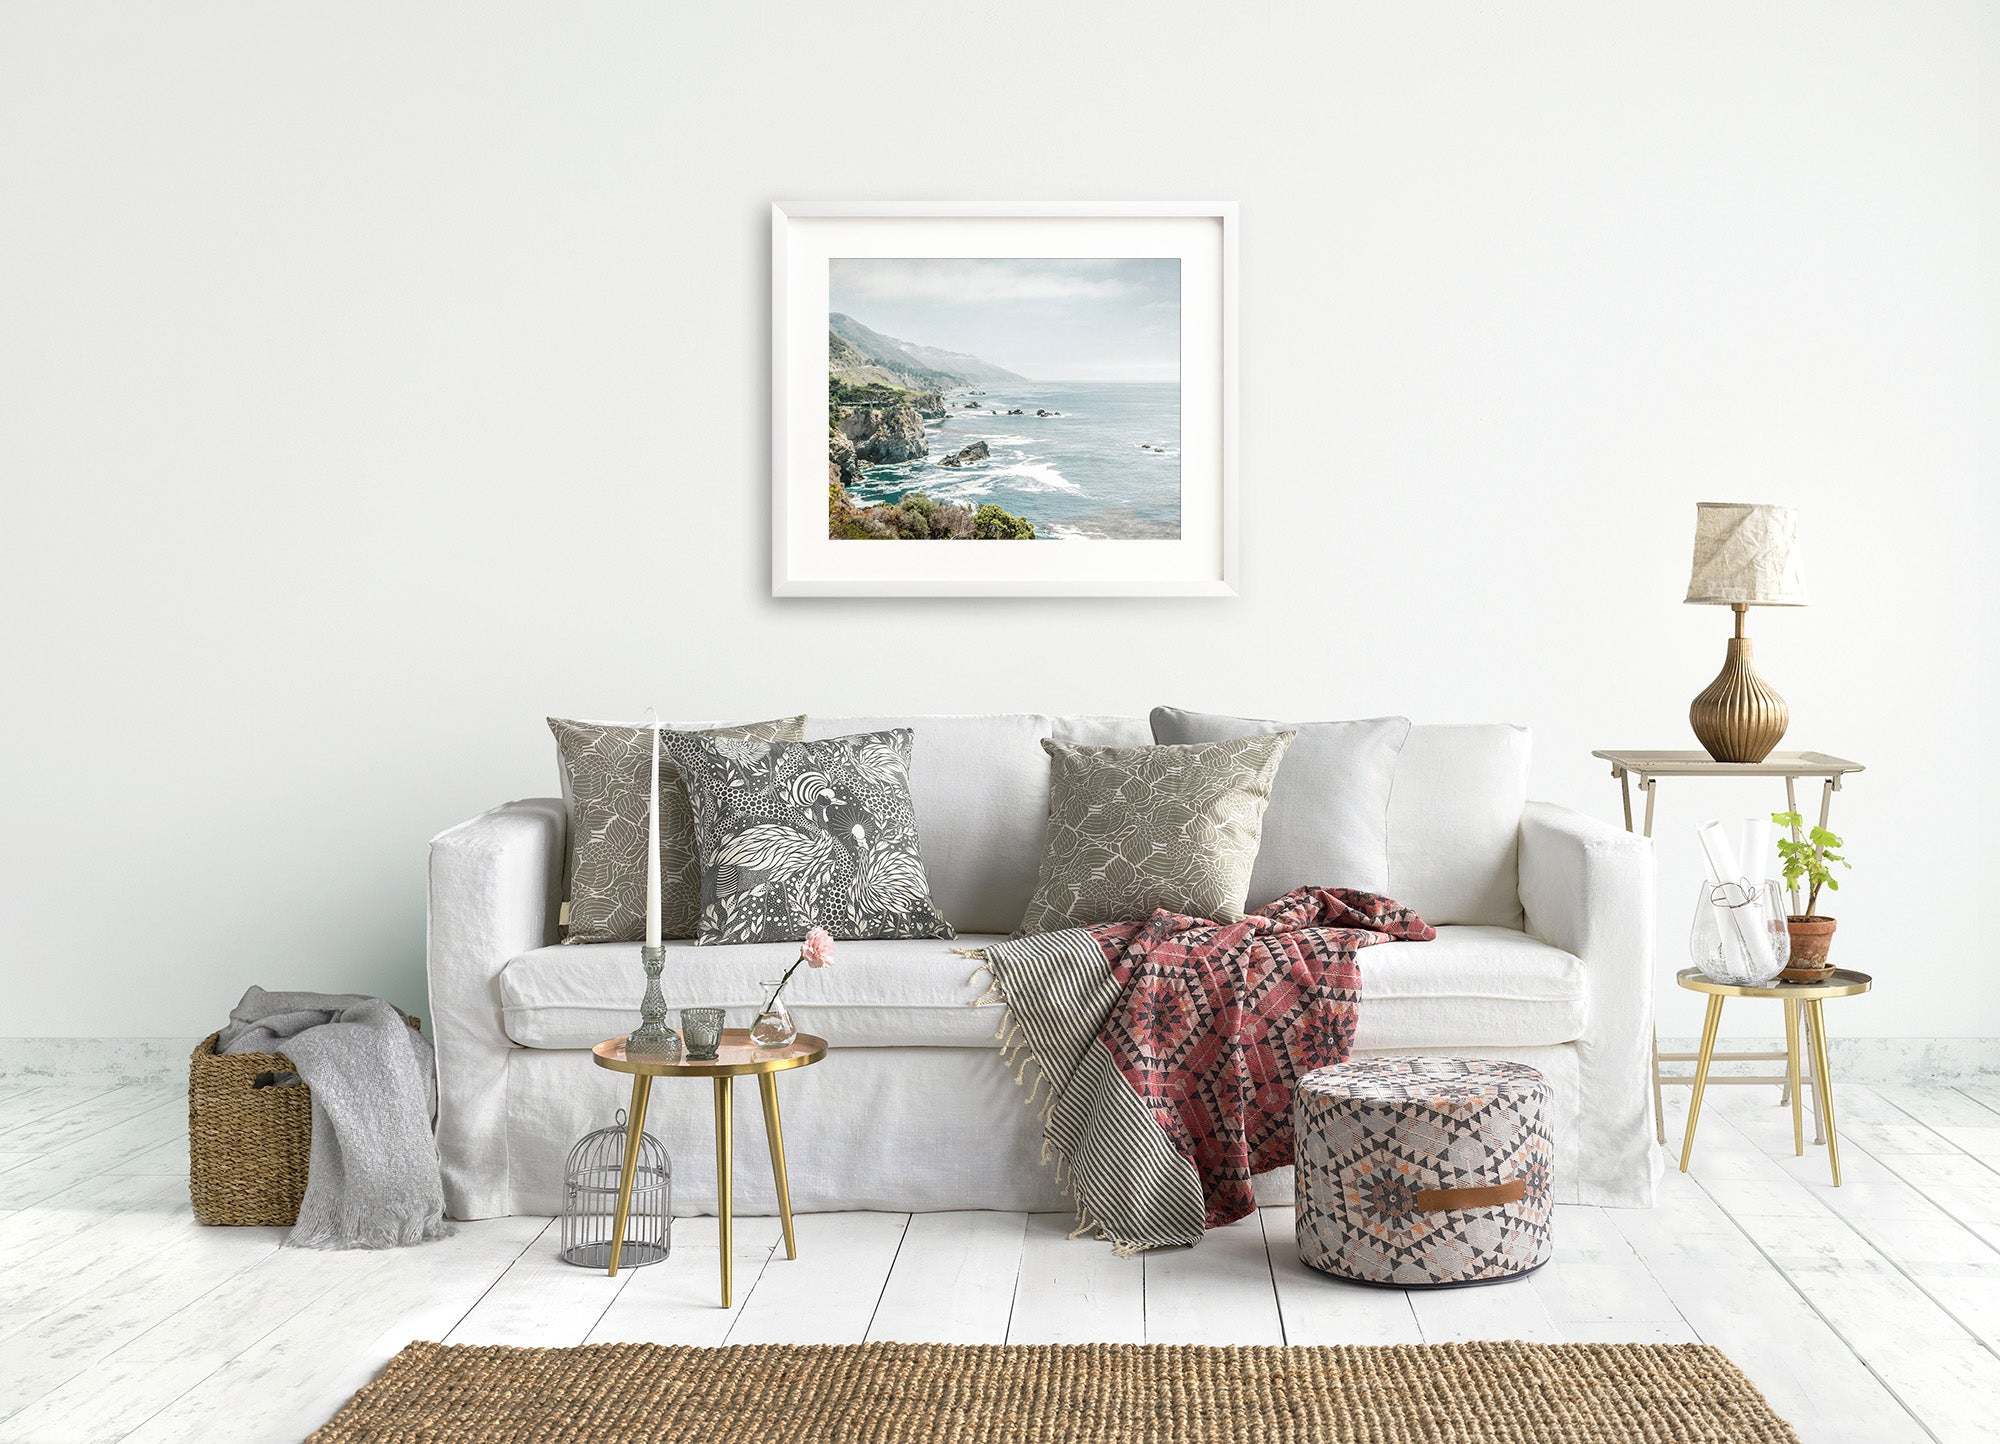 A cozy living room with a white sofa decorated with patterned cushions, a side table with a lamp, a basket, and an Offley Green Big Sur Landscape Print of &#39;Rocky Rocks&#39; on the wall.